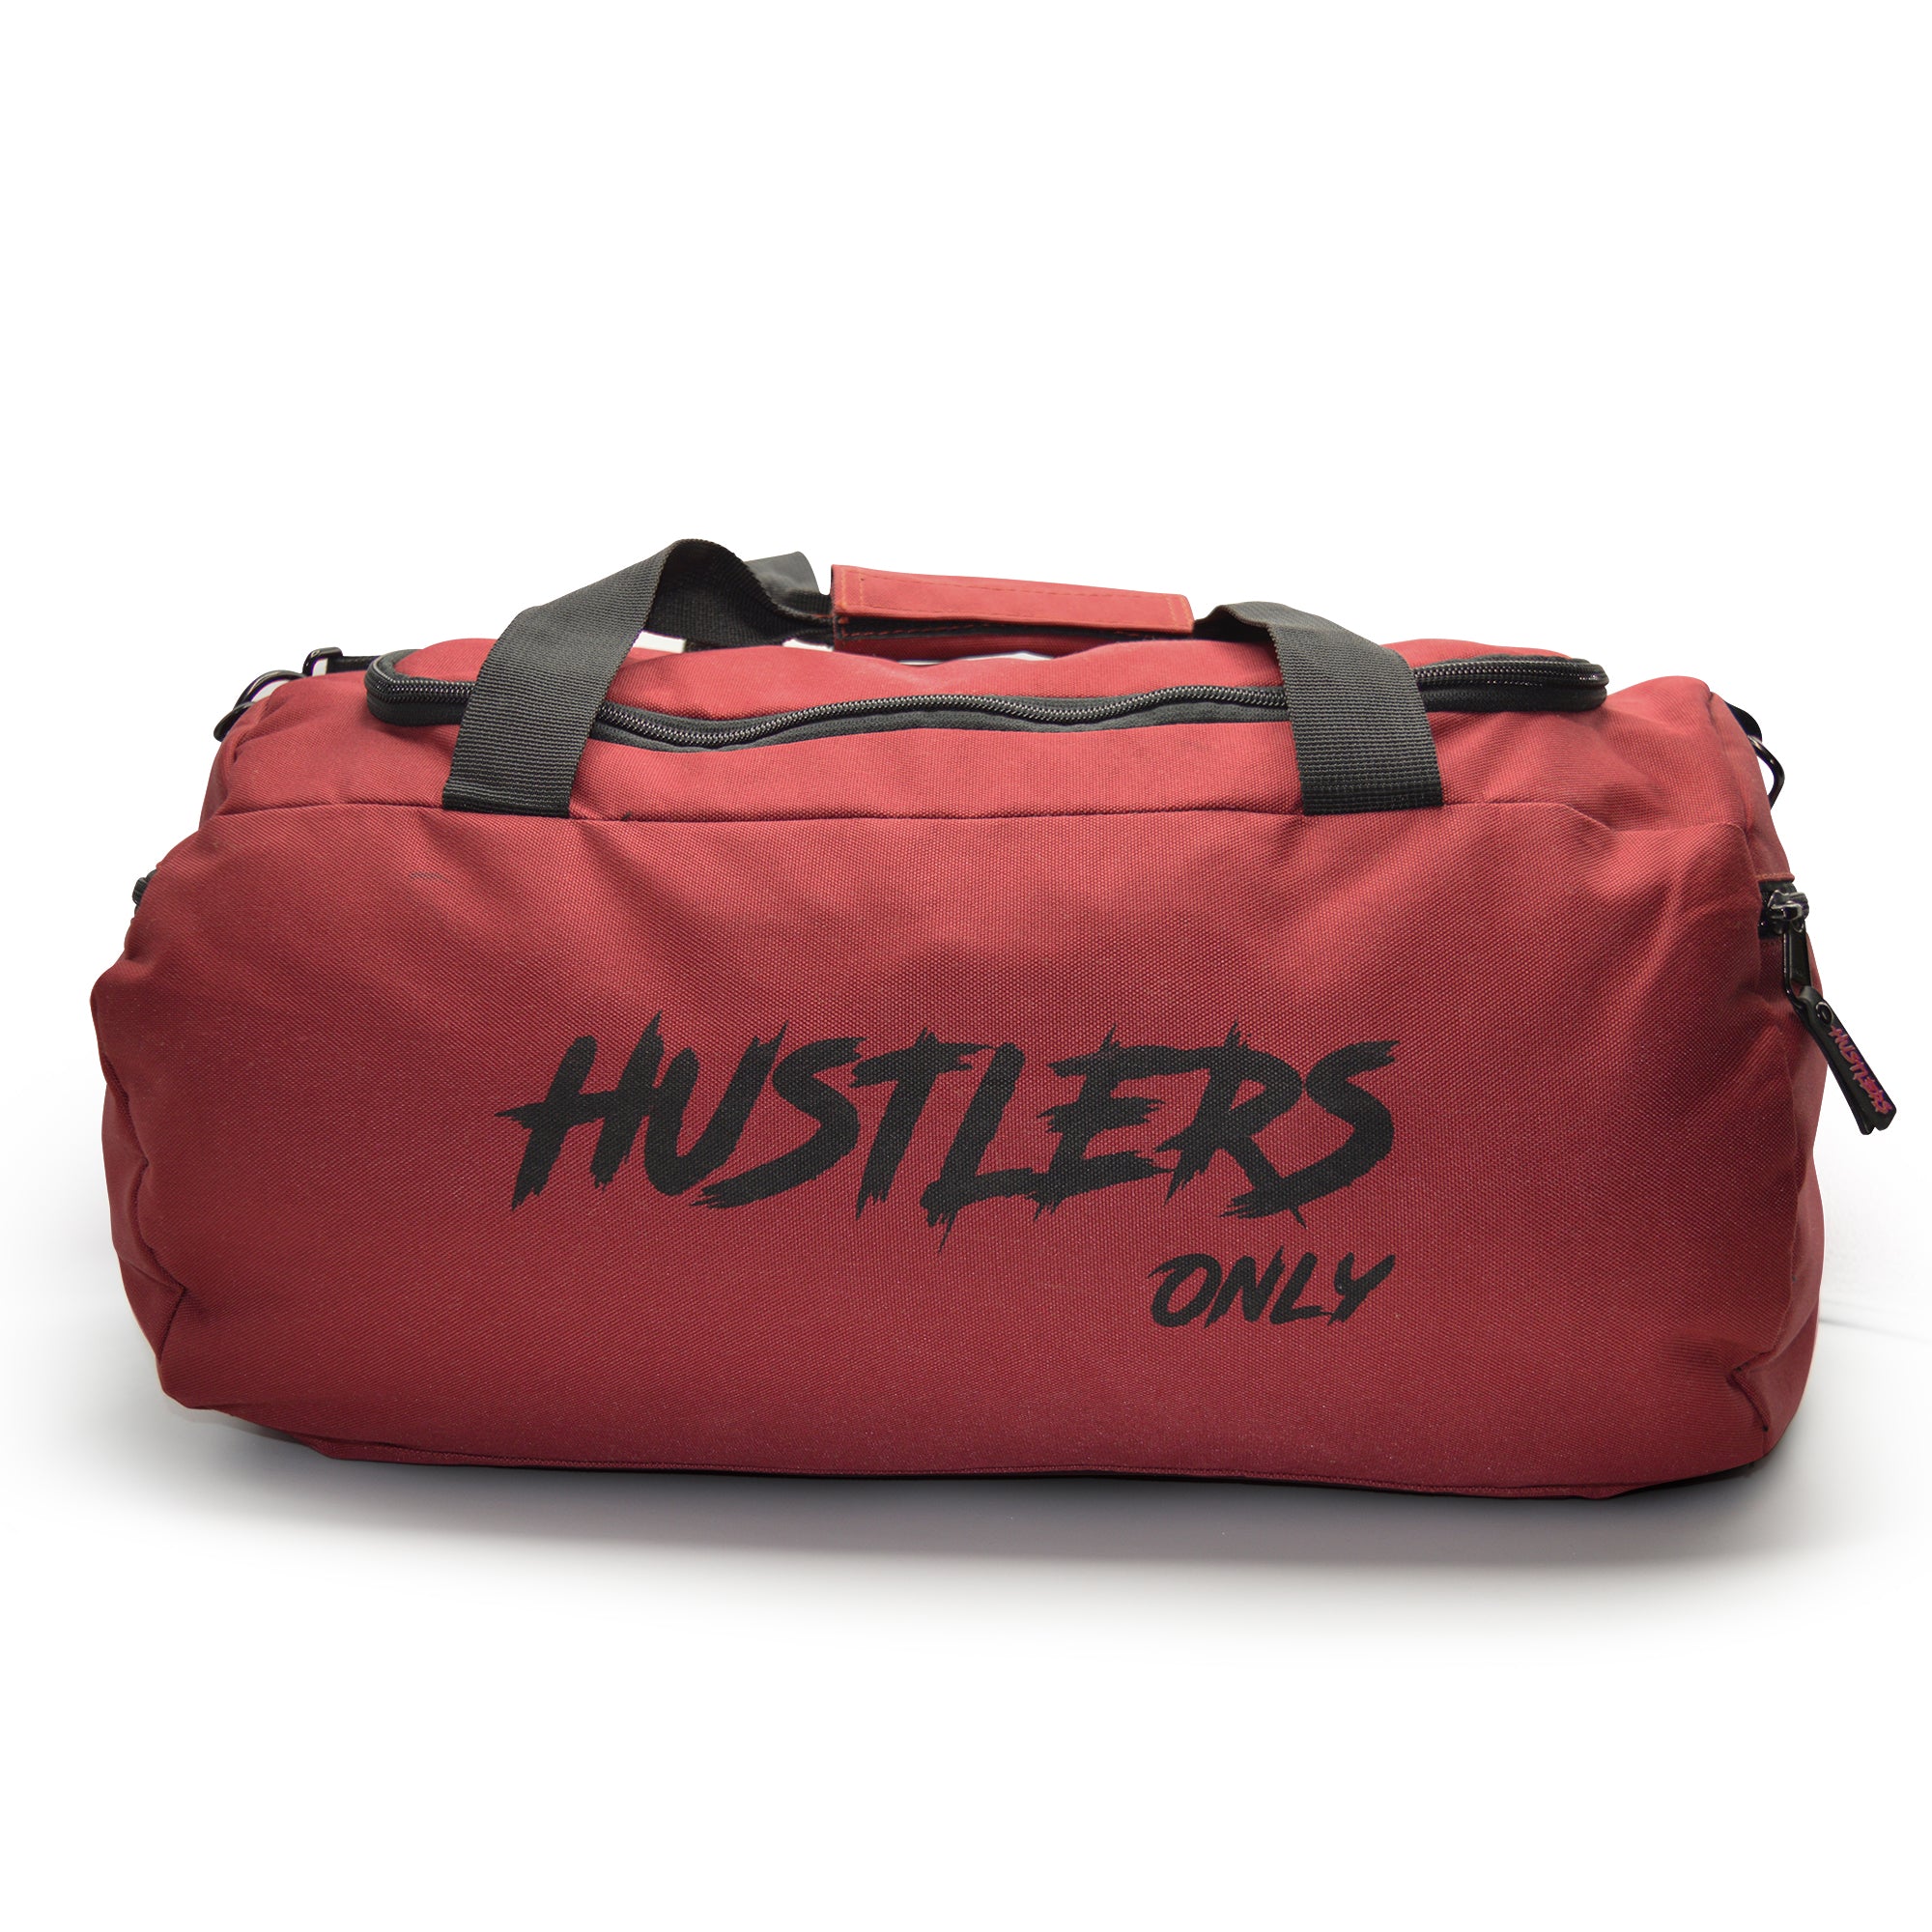 Buy Online Lv Travelling, Gym And Sports Bag In Pakistan